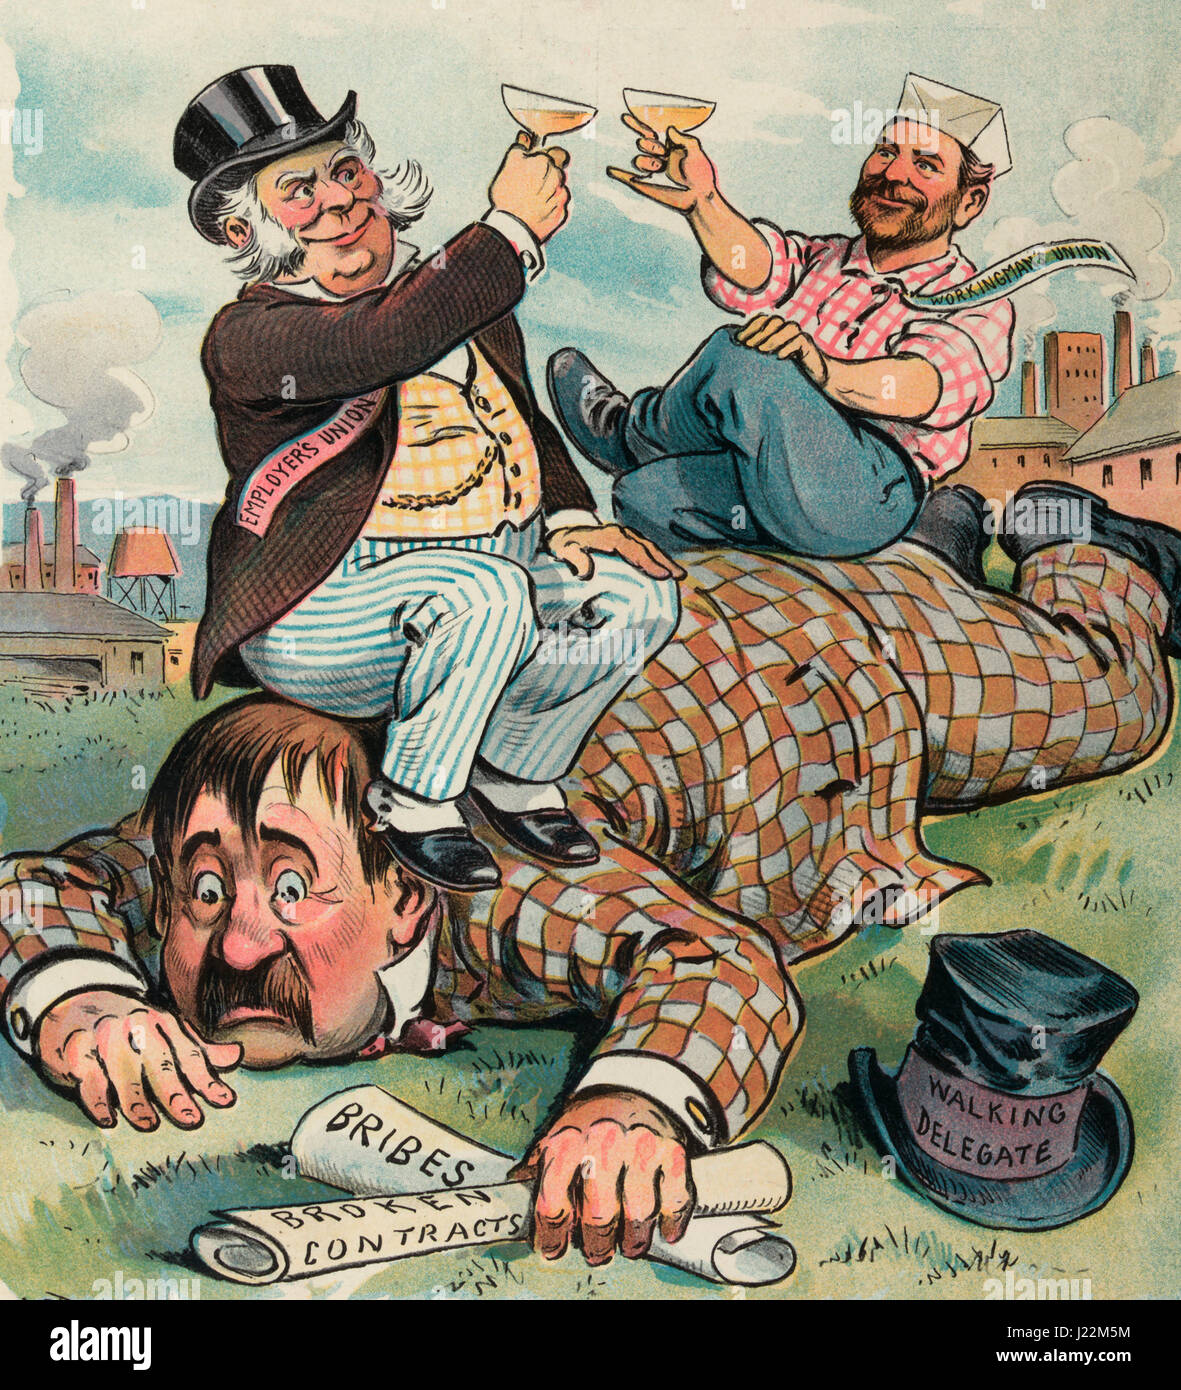 In unions there is strength! Illustration shows a man labeled 'Employer's Union' and a man labeled 'Workingman's Union' drinking a toast while sitting on the back of a man sprawled on the ground, clutching papers labeled 'Bribes' and 'Broken Contracts', his hat nearby is labeled 'Walking Delegate'. There are factories in the background. Political Cartoon, 1903 Stock Photo